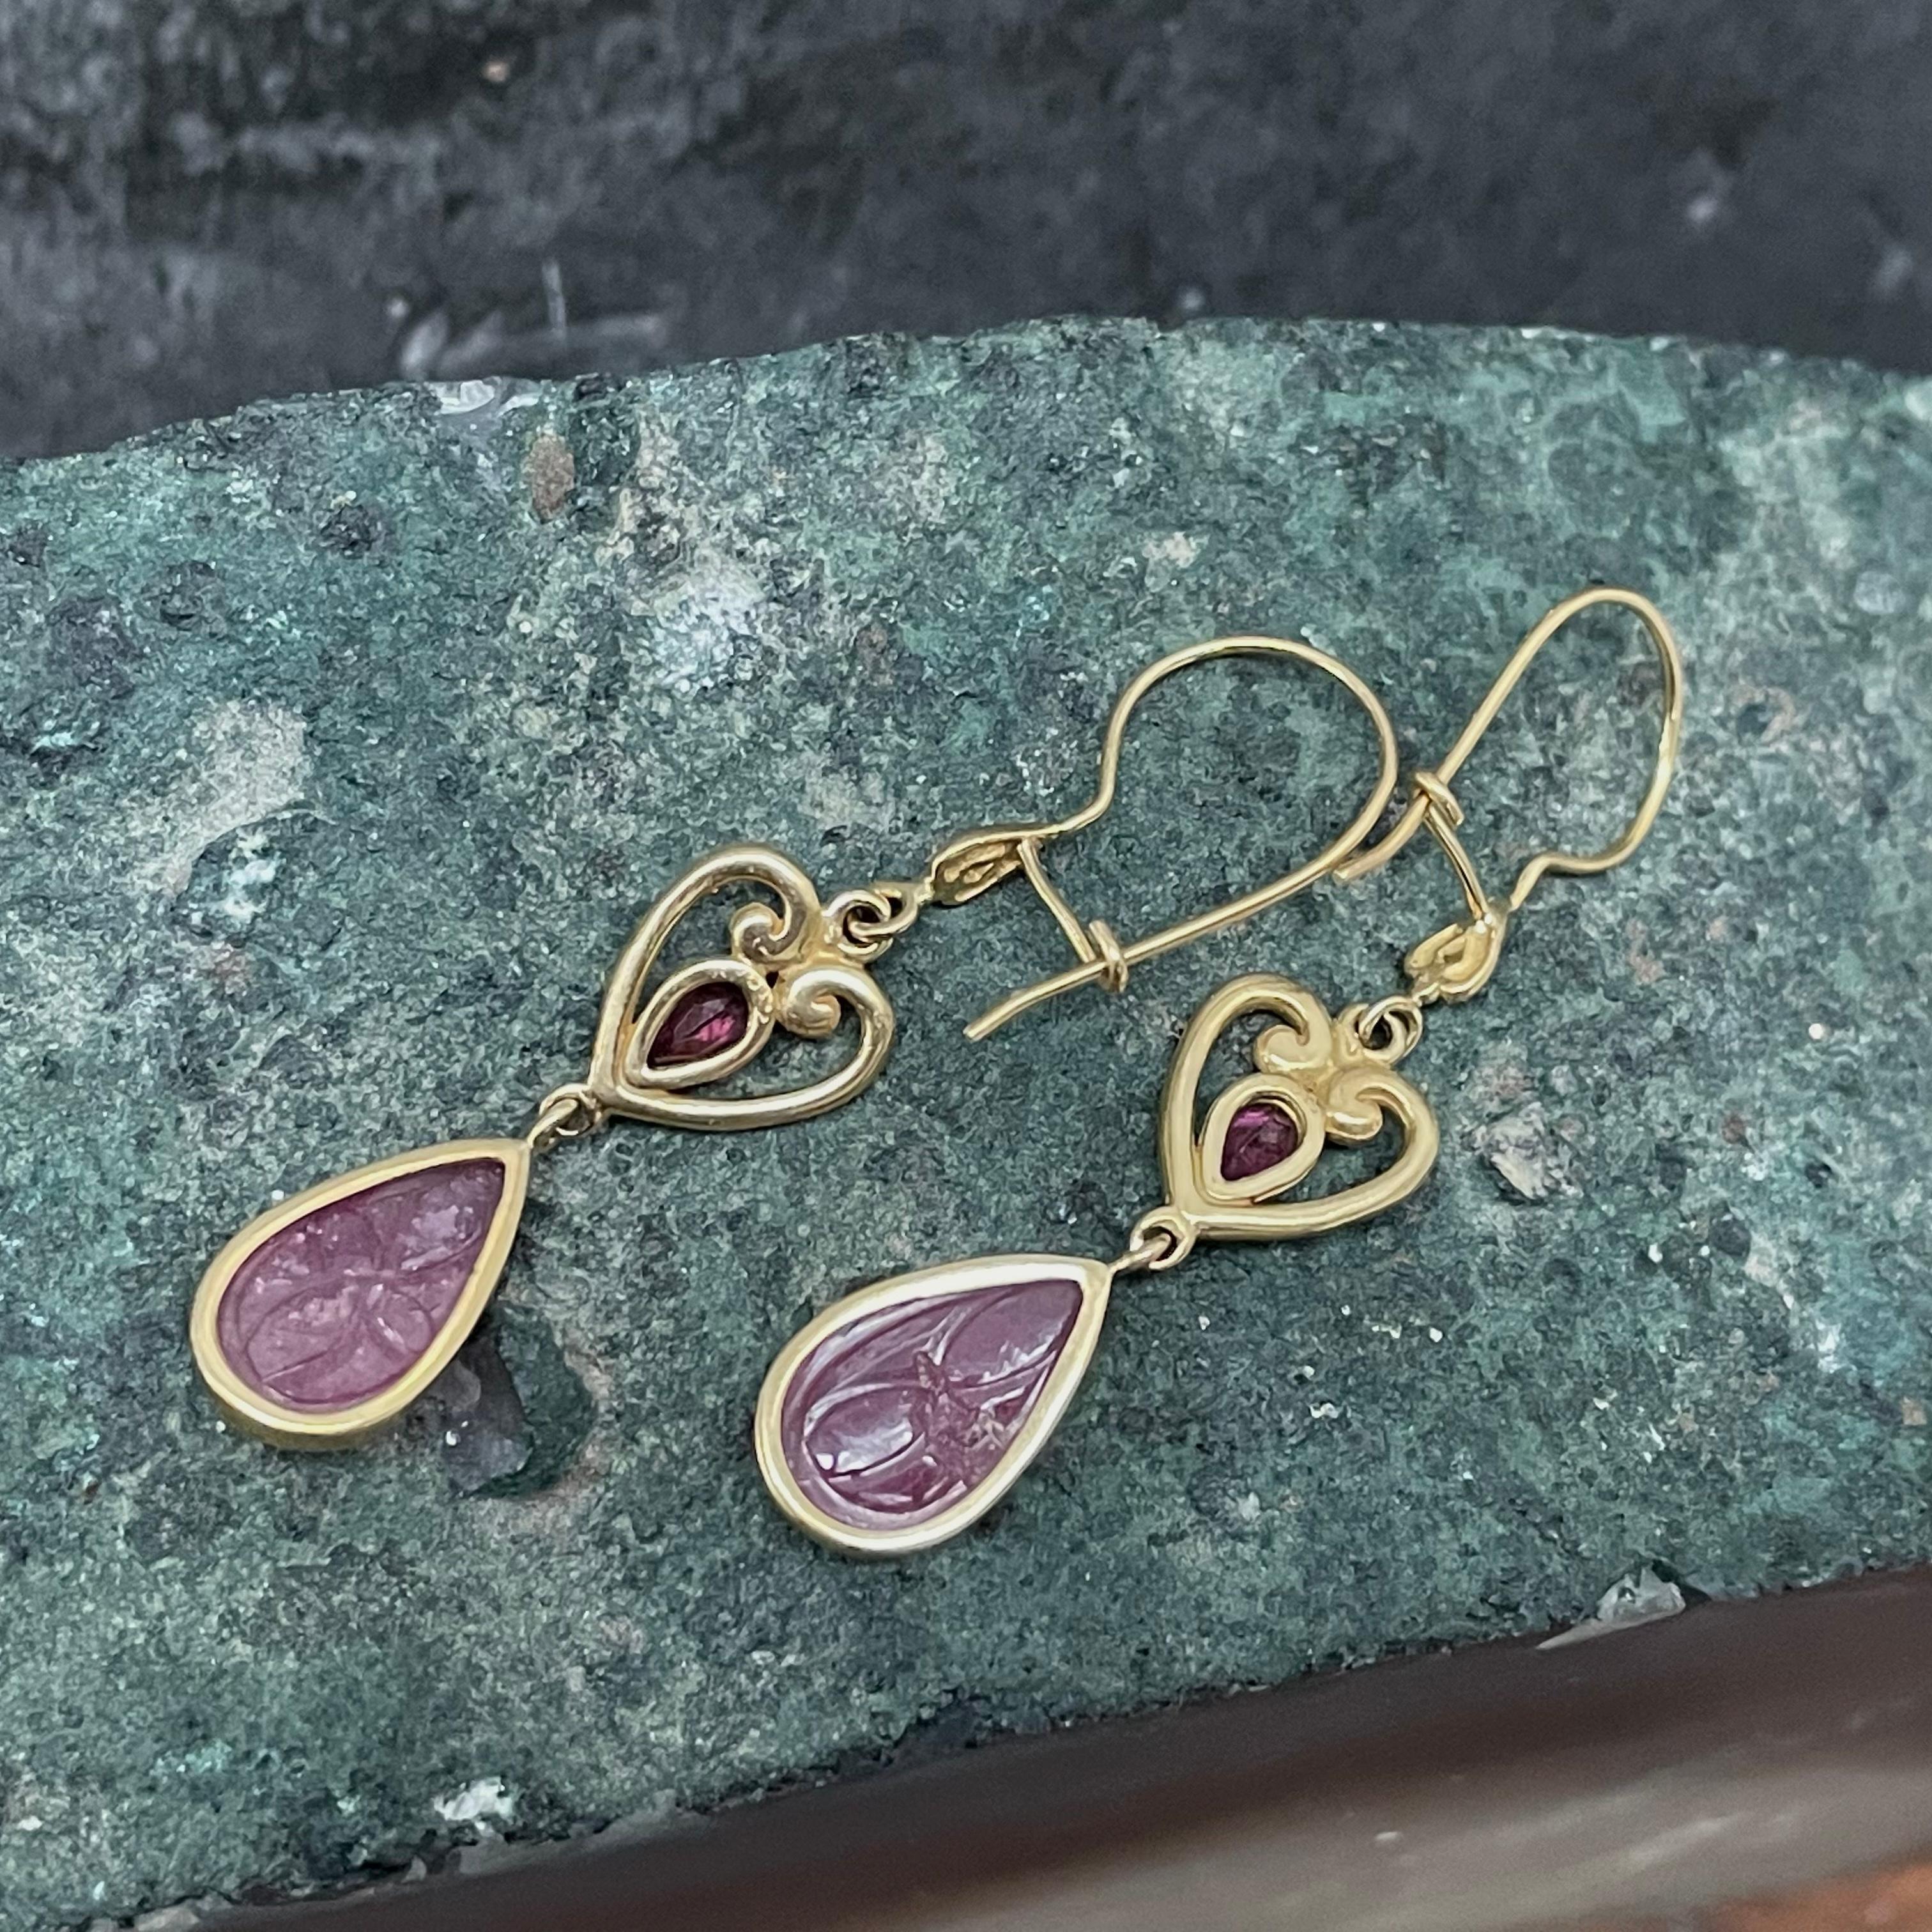 Two 8 x 12 mm pear shaped floral carved rubies dangle below heart shaped carved gold components with small faceted pink tourmaline pear accents in this one of kind earring design. 